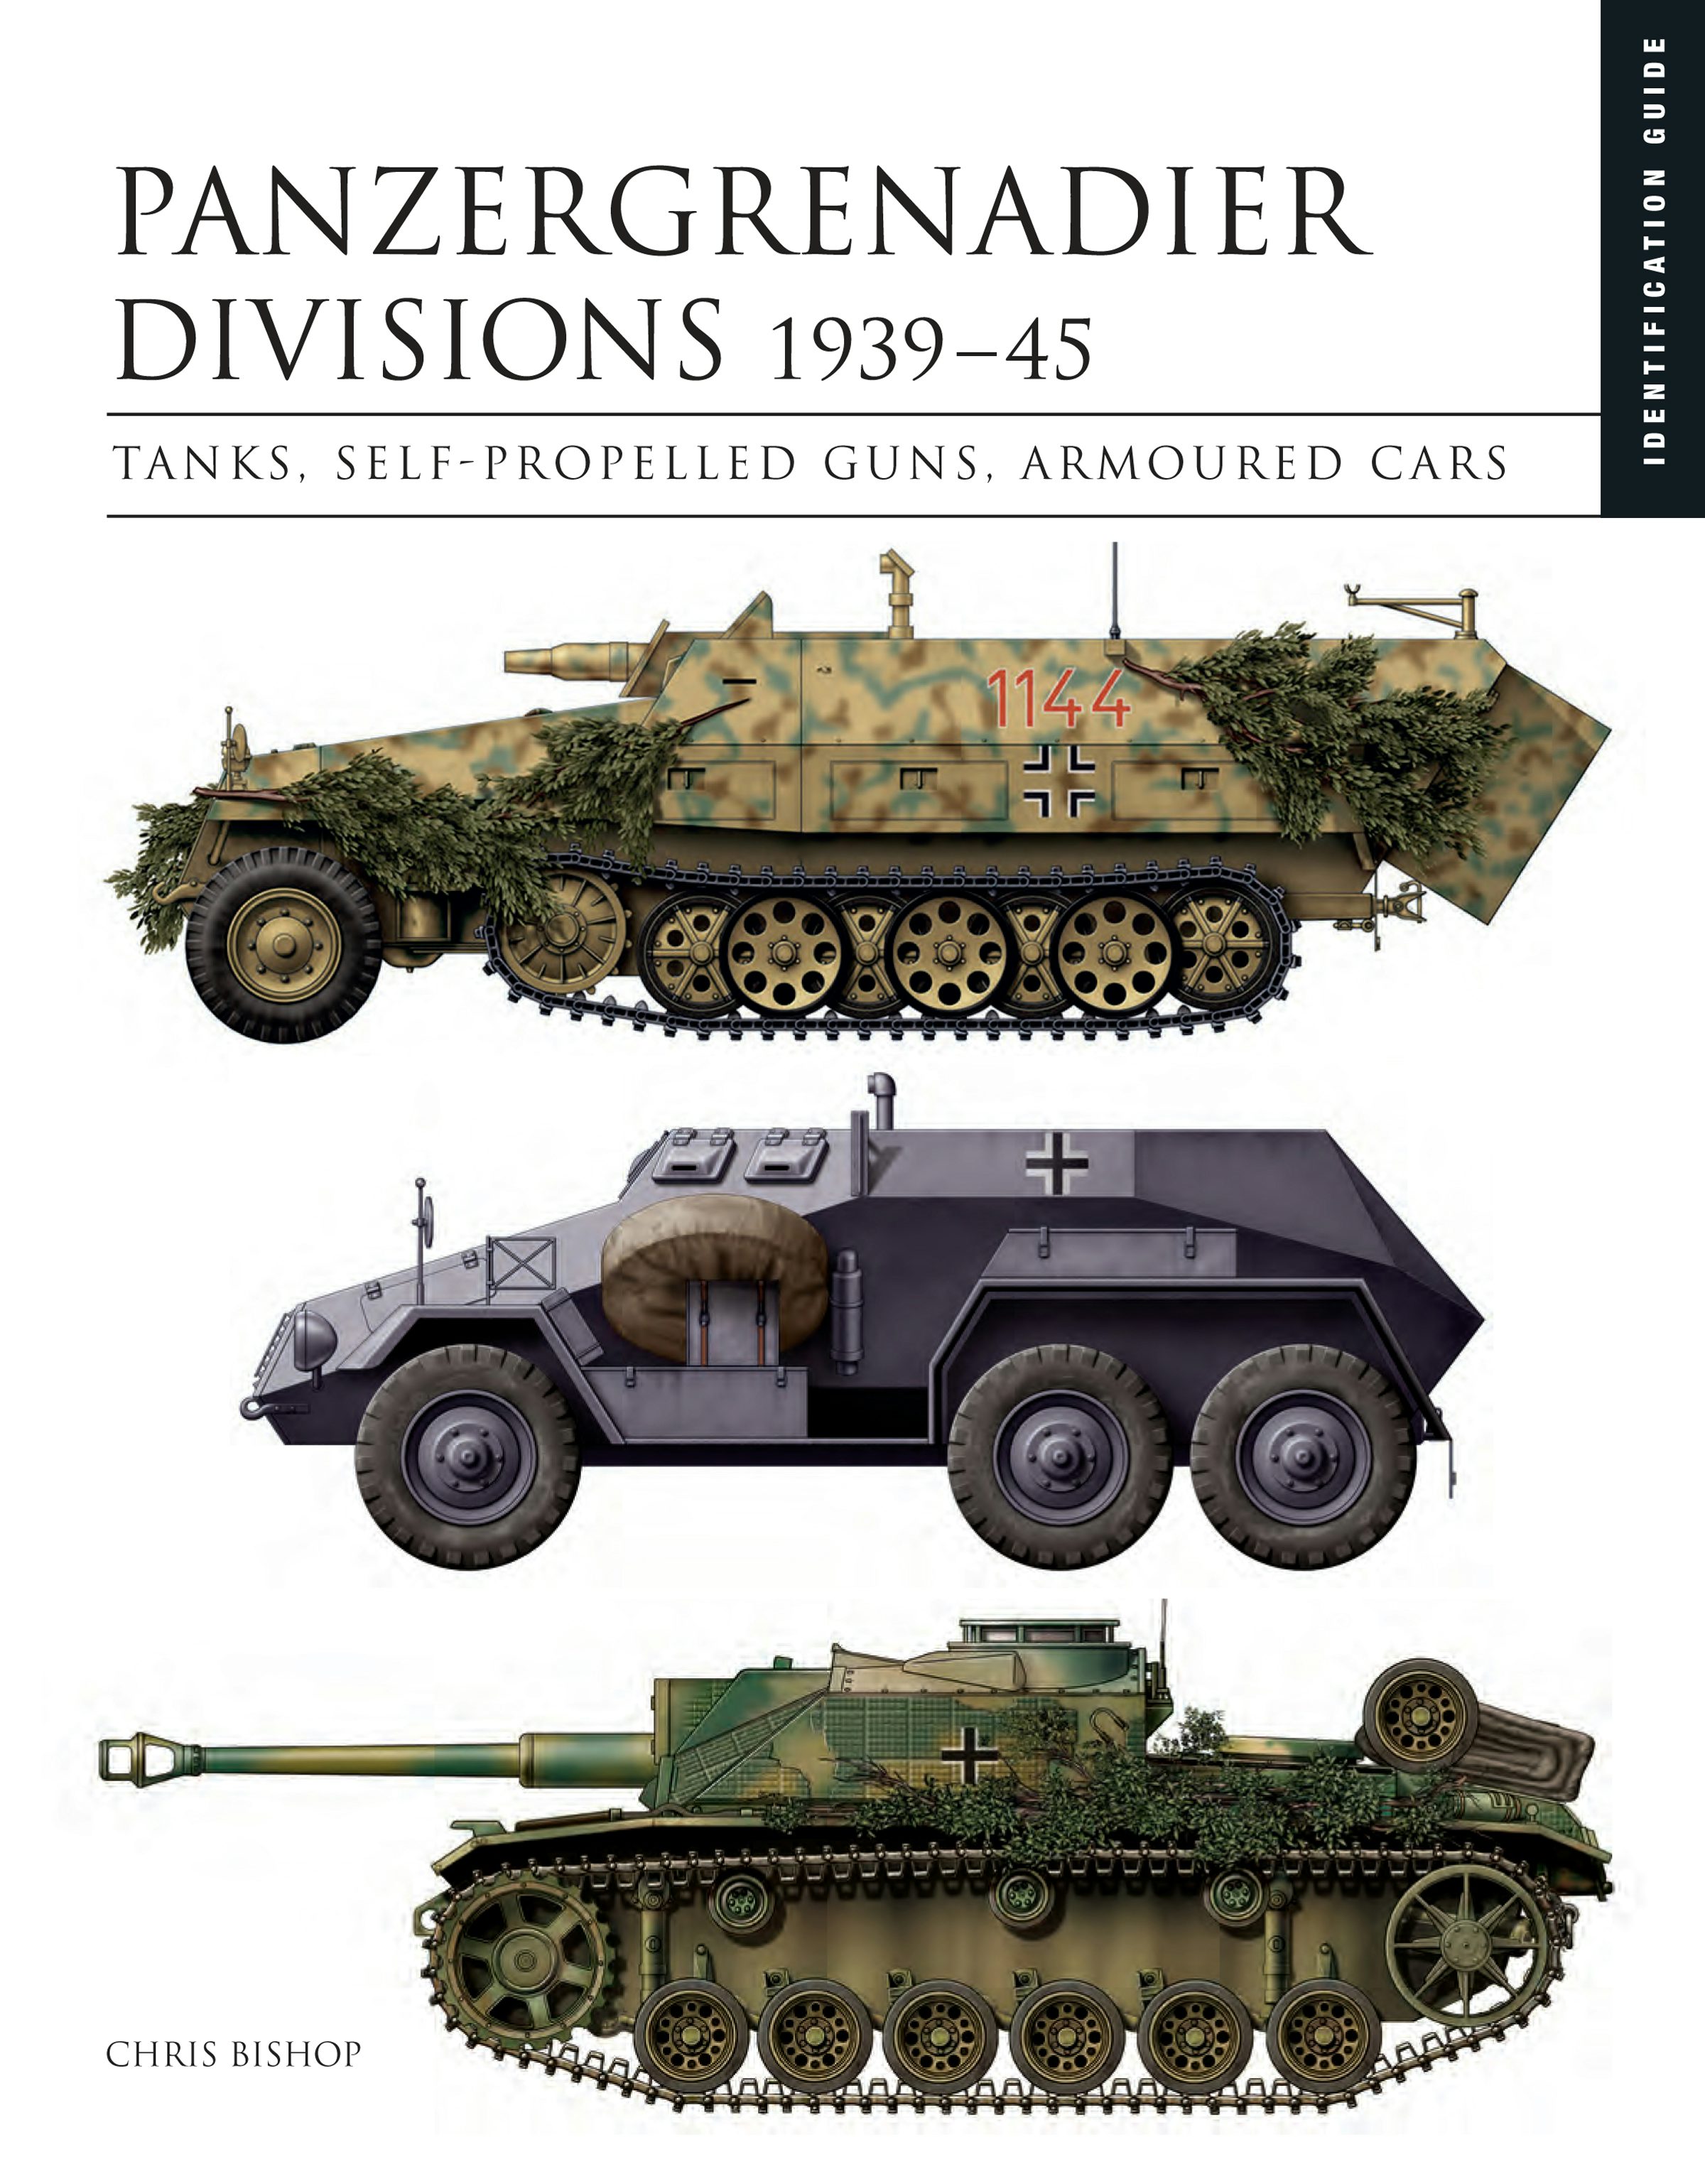 Waffen-SS Divisions 1939-45 by Chris Bishop: 9781838863517 - Union 